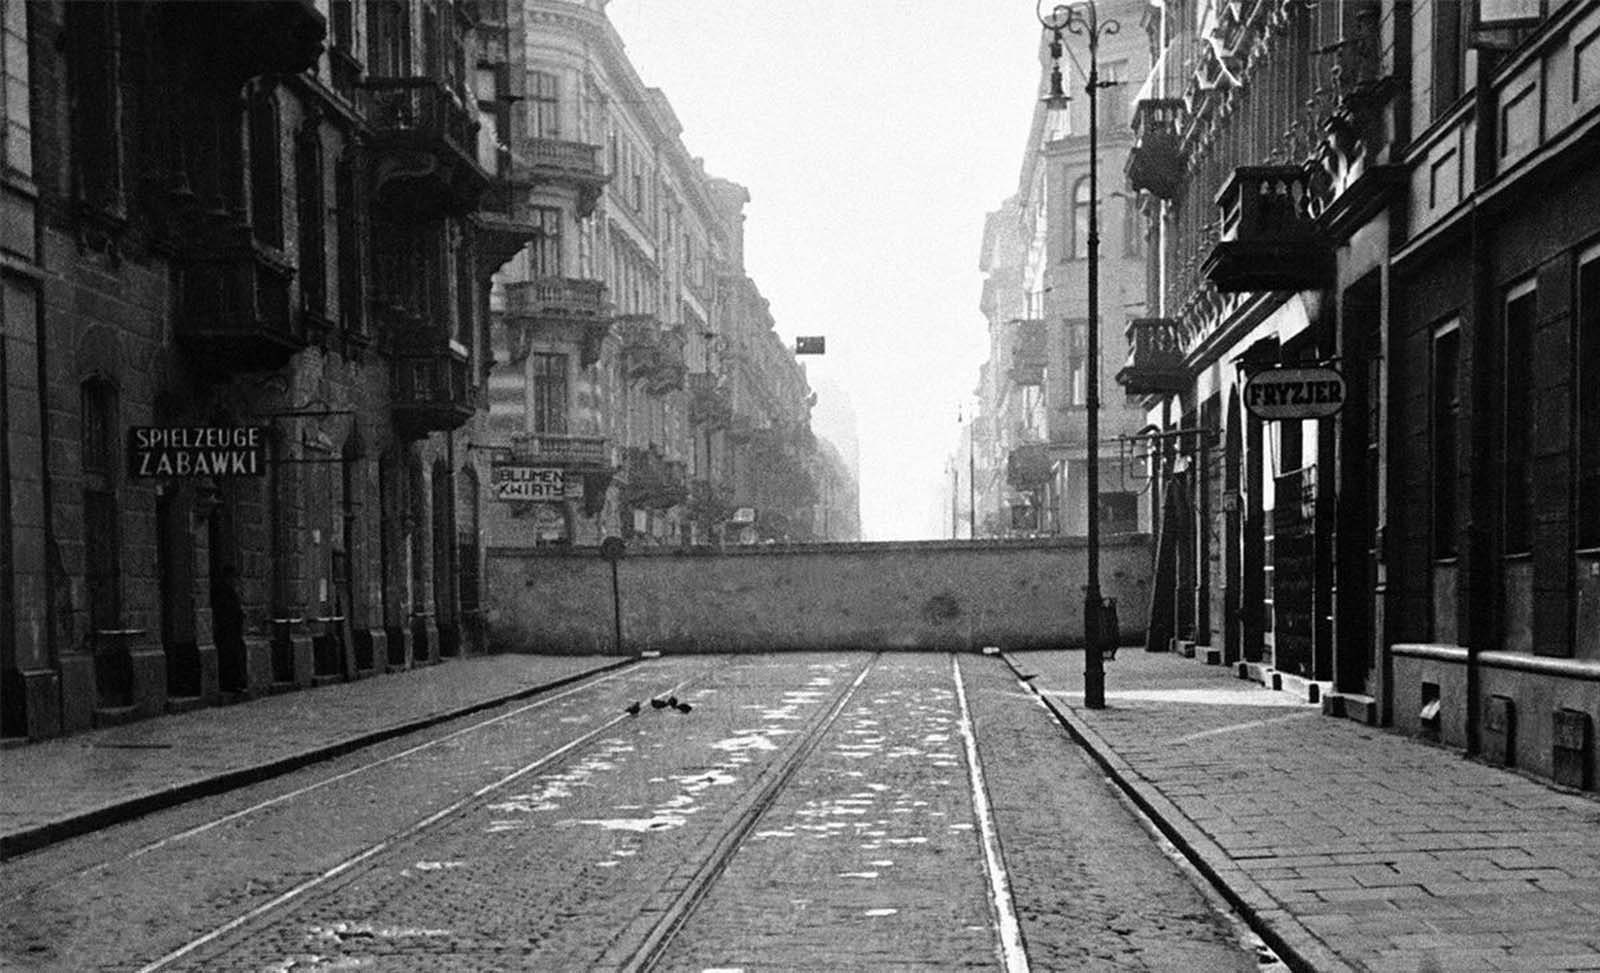 A newly-constructed wall partitions the central part of Warsaw, Poland, seen on December 20, 1940. It is part of red brick and gray stone walls built 12 to 15 feet high by the Nazis as a ghetto - a pen for Warsaw's approximately 500,000 Jews.